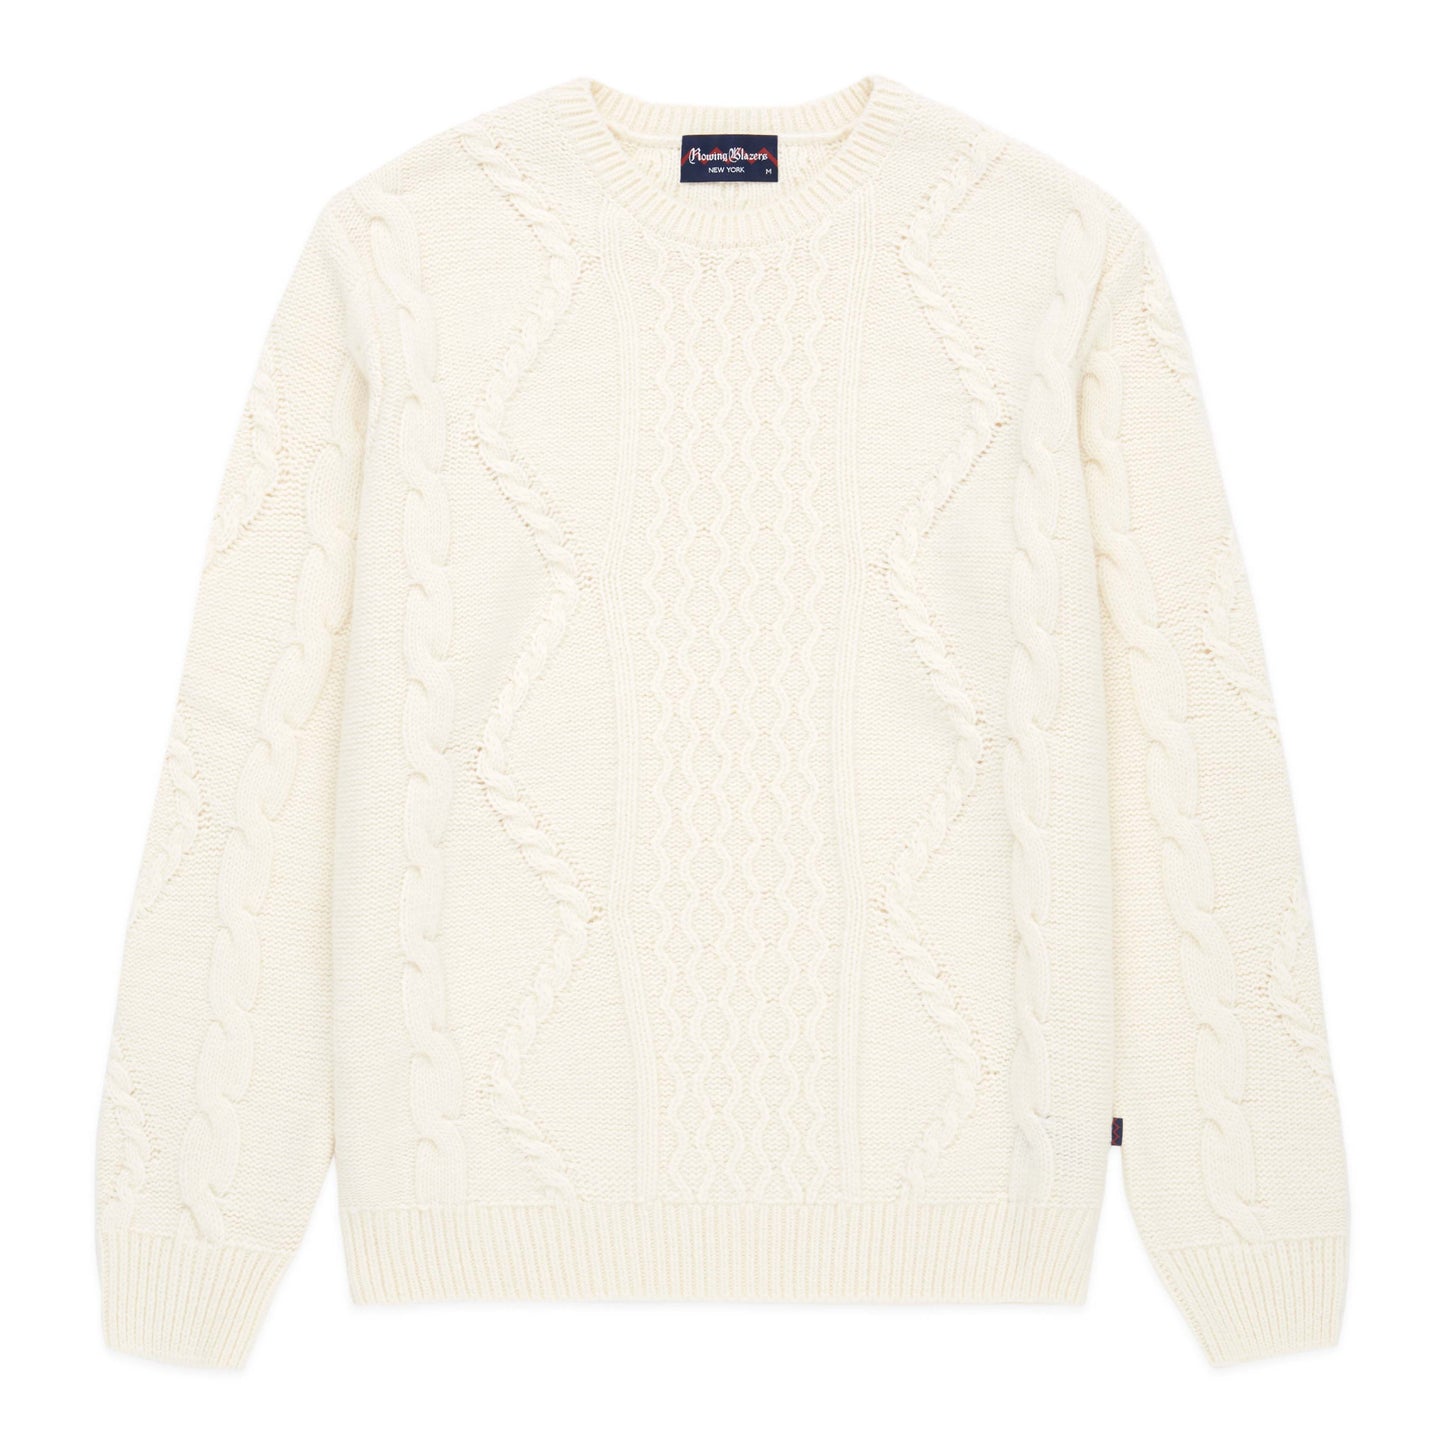 Men's Fisherman Cable Knit Sweater